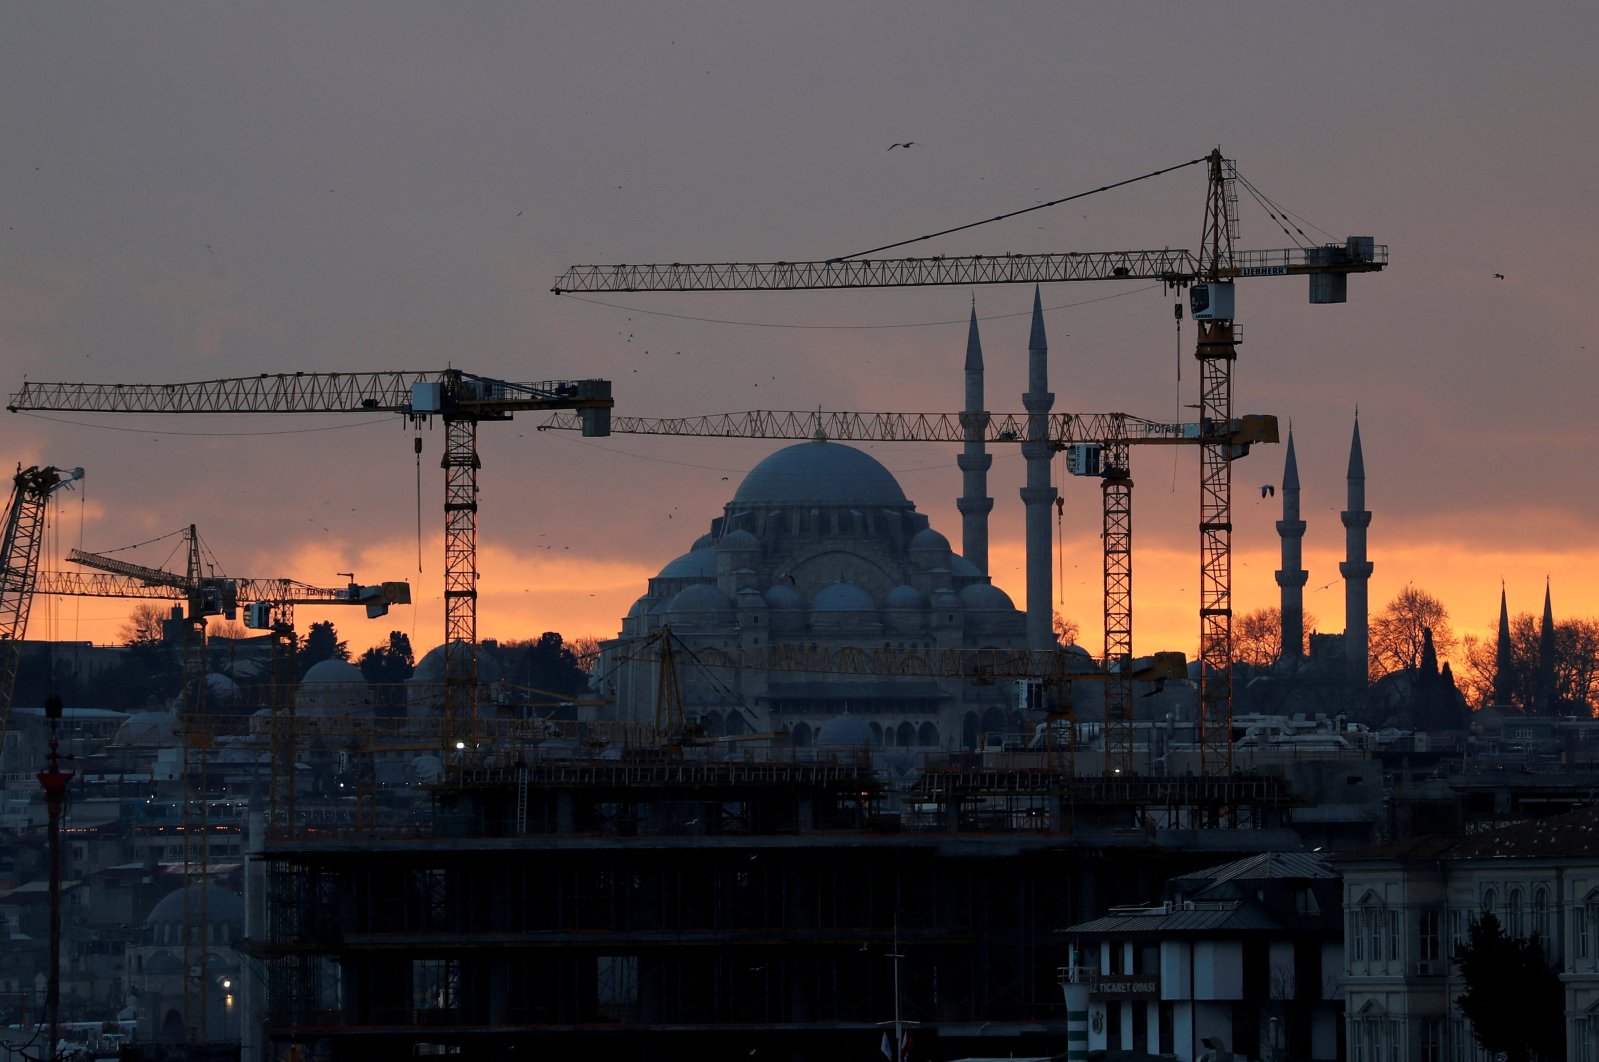 The sun sets behind the cranes of the Galata Port construction site and a mosque in Istanbul, Turkey, Jan. 23, 2020. (Reuters Photo)